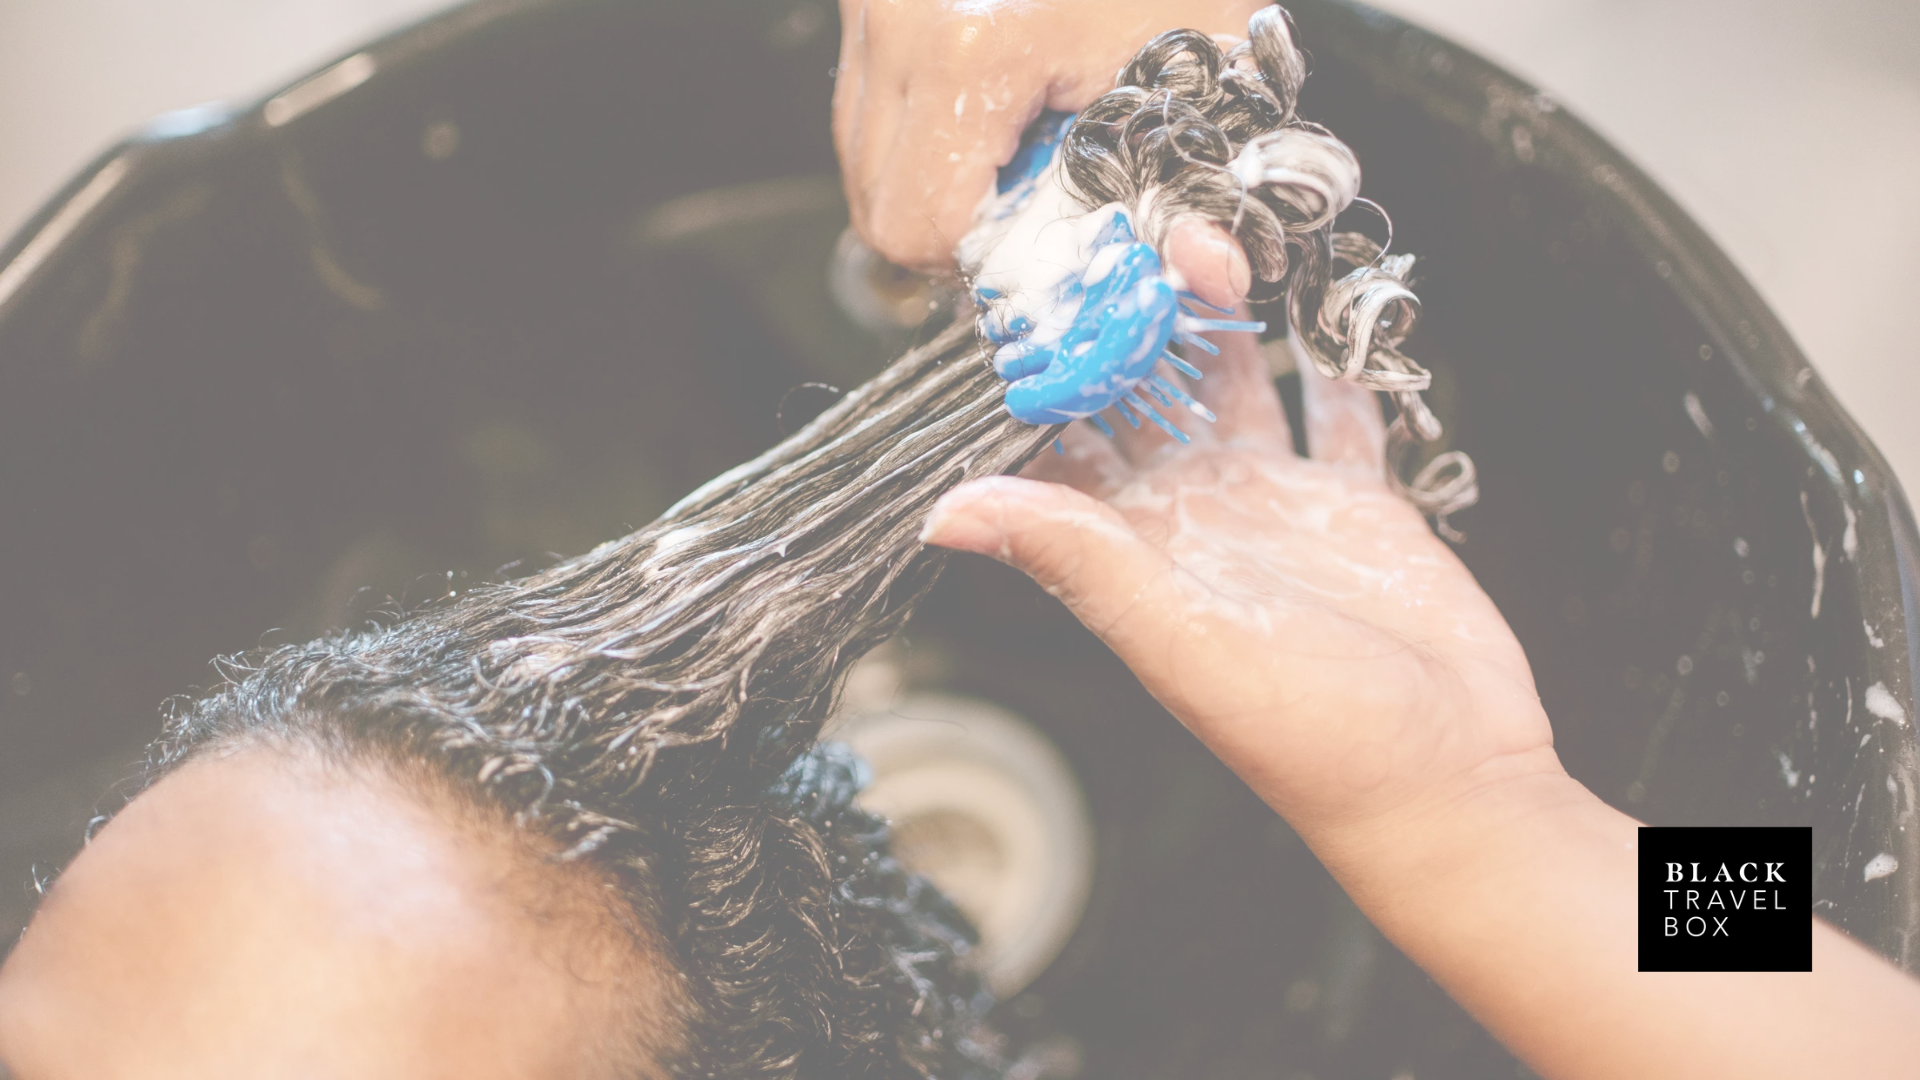 Sulfates, Parabens, and Phthalates: The Harmful Ingredients Hiding in Your Hair Products